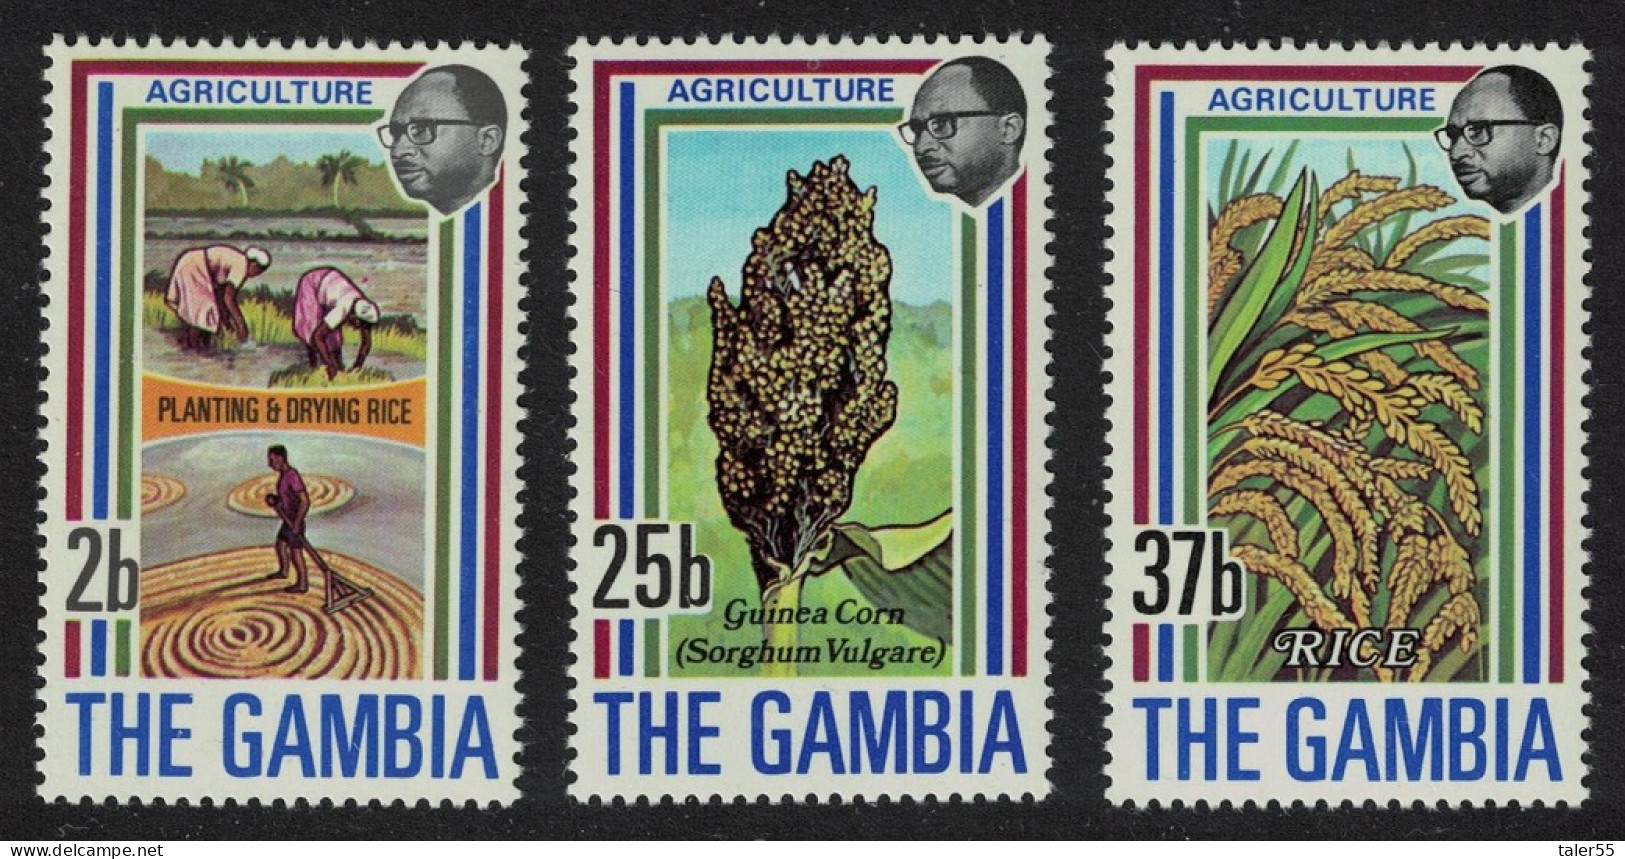 Gambia Agriculture 1st Series 3v 1973 MNH SG#301-303 - Gambie (1965-...)